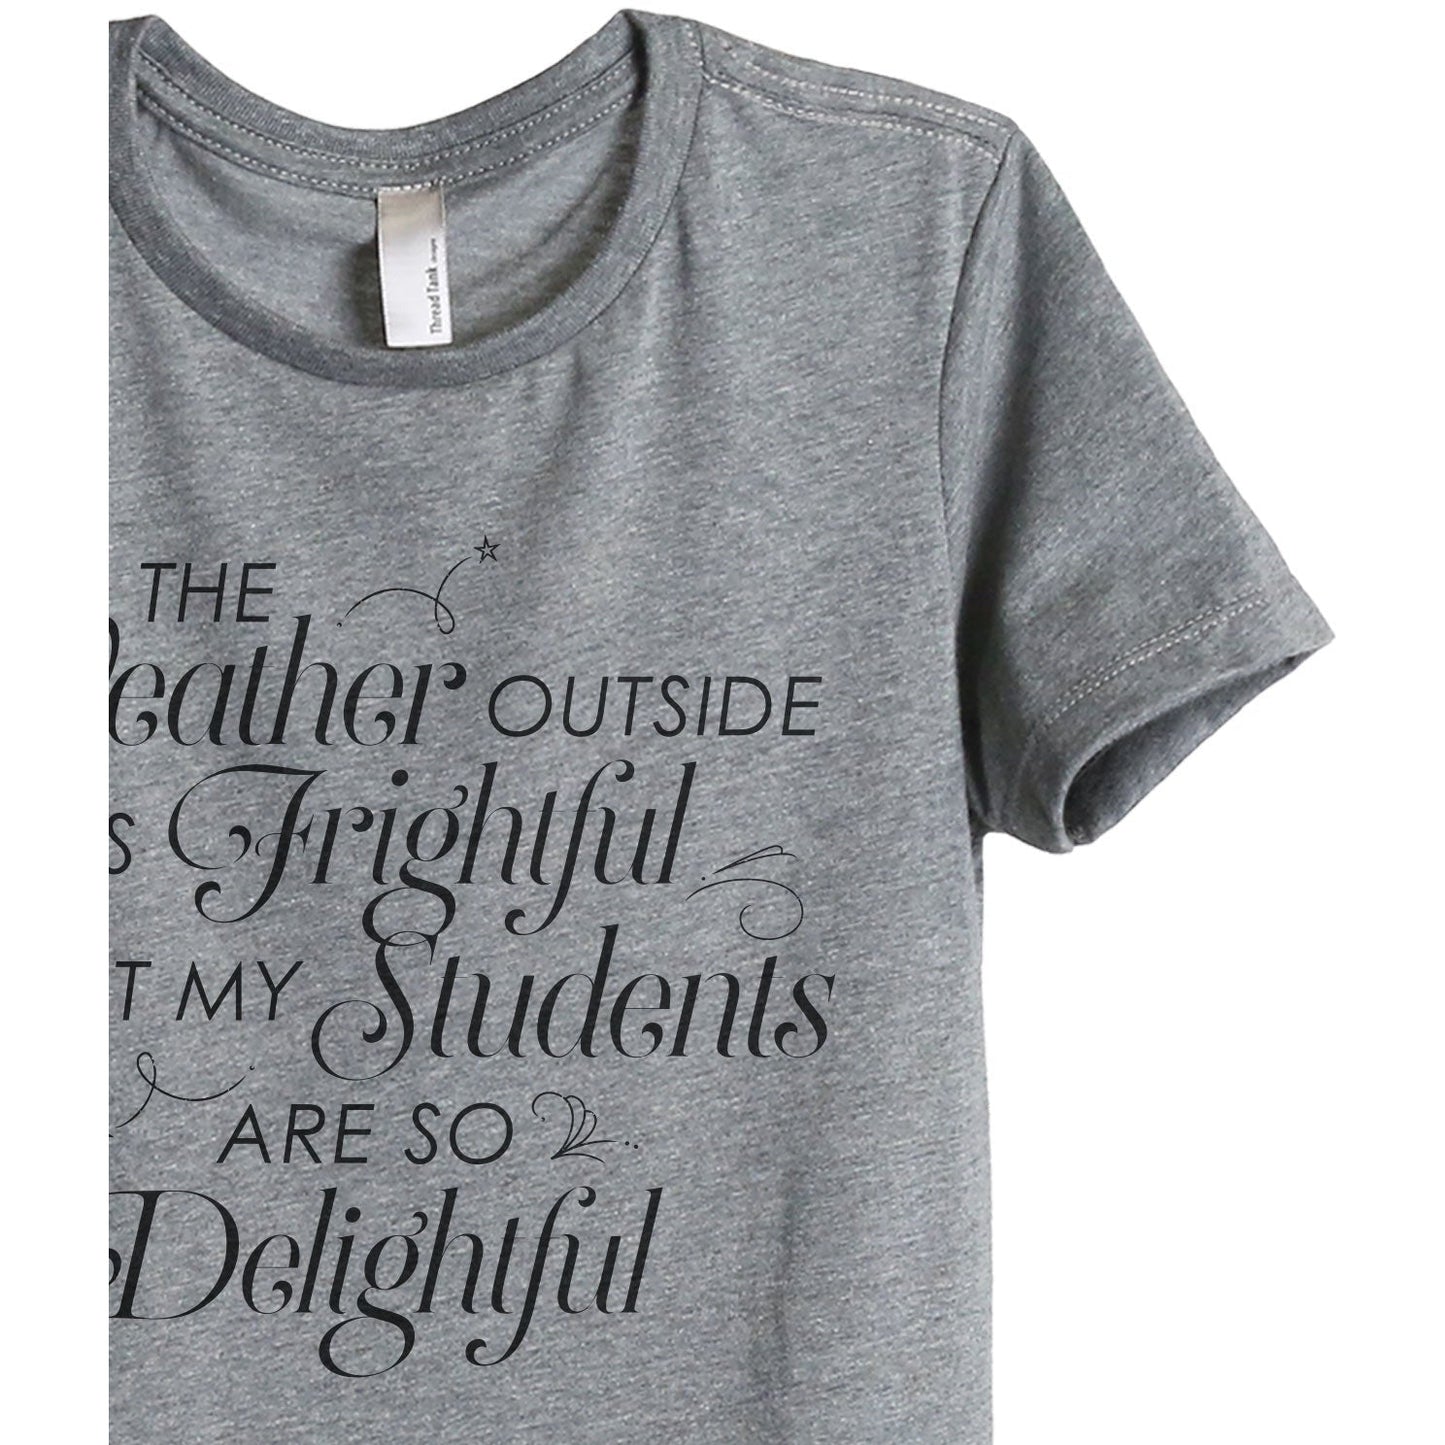 The Weather Outside Is Frightful But My Students Are So Delightful - Stories You Can Wear